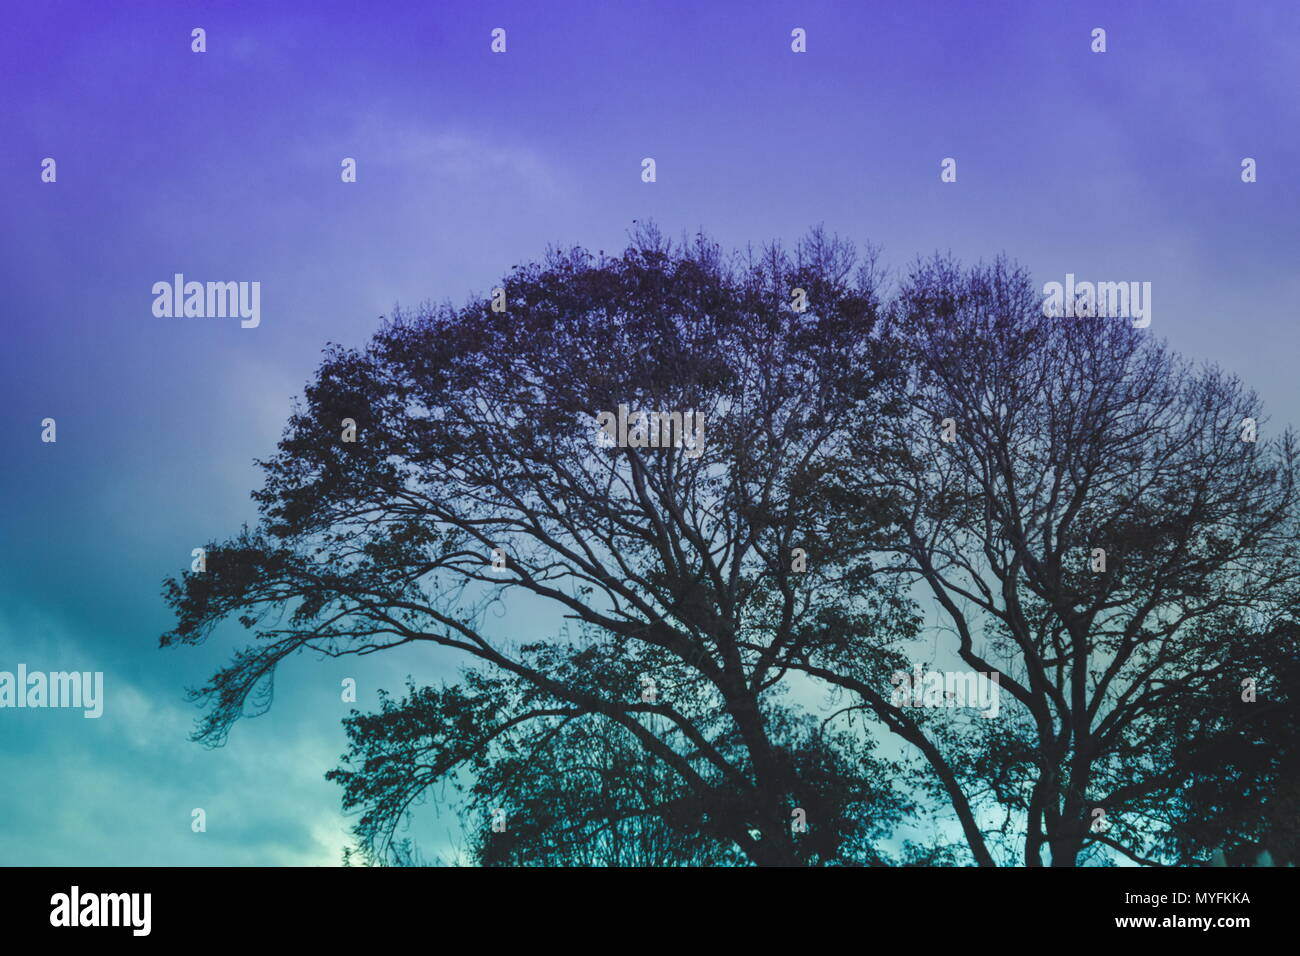 landscape image of a silhouetted tree against a purple and turquoise sky at dusk. Stock Photo